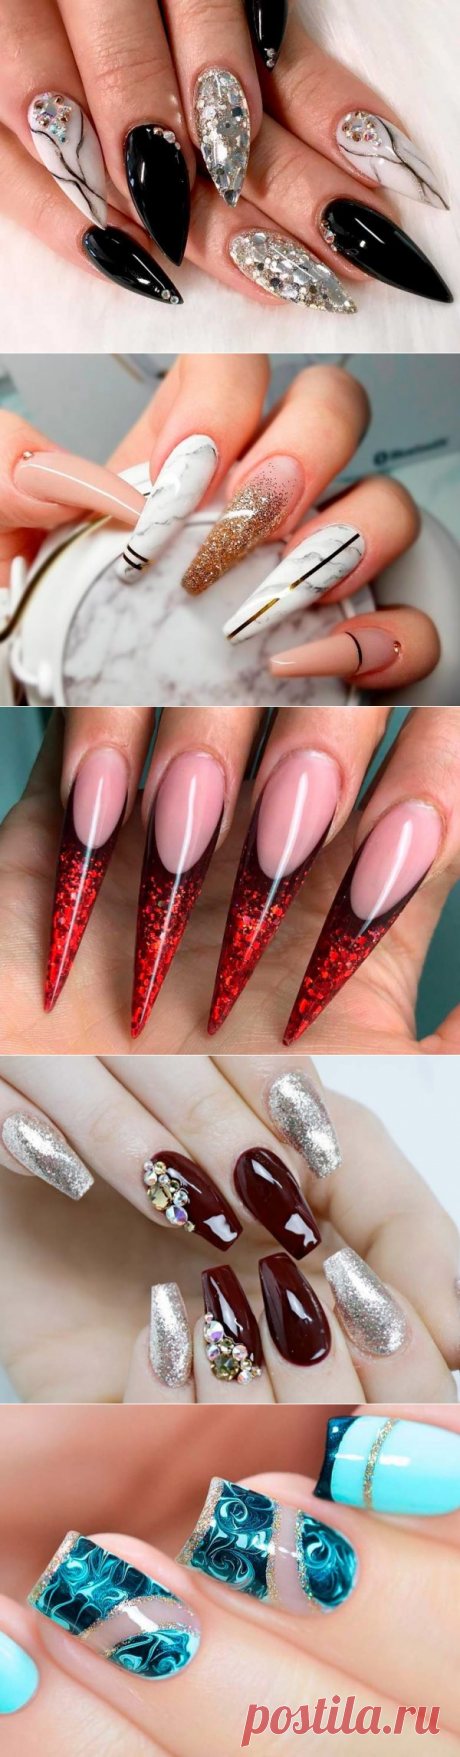 Trendy Designs and Shapes For Acrylic Nails in 2017 | NailDesignsJournal